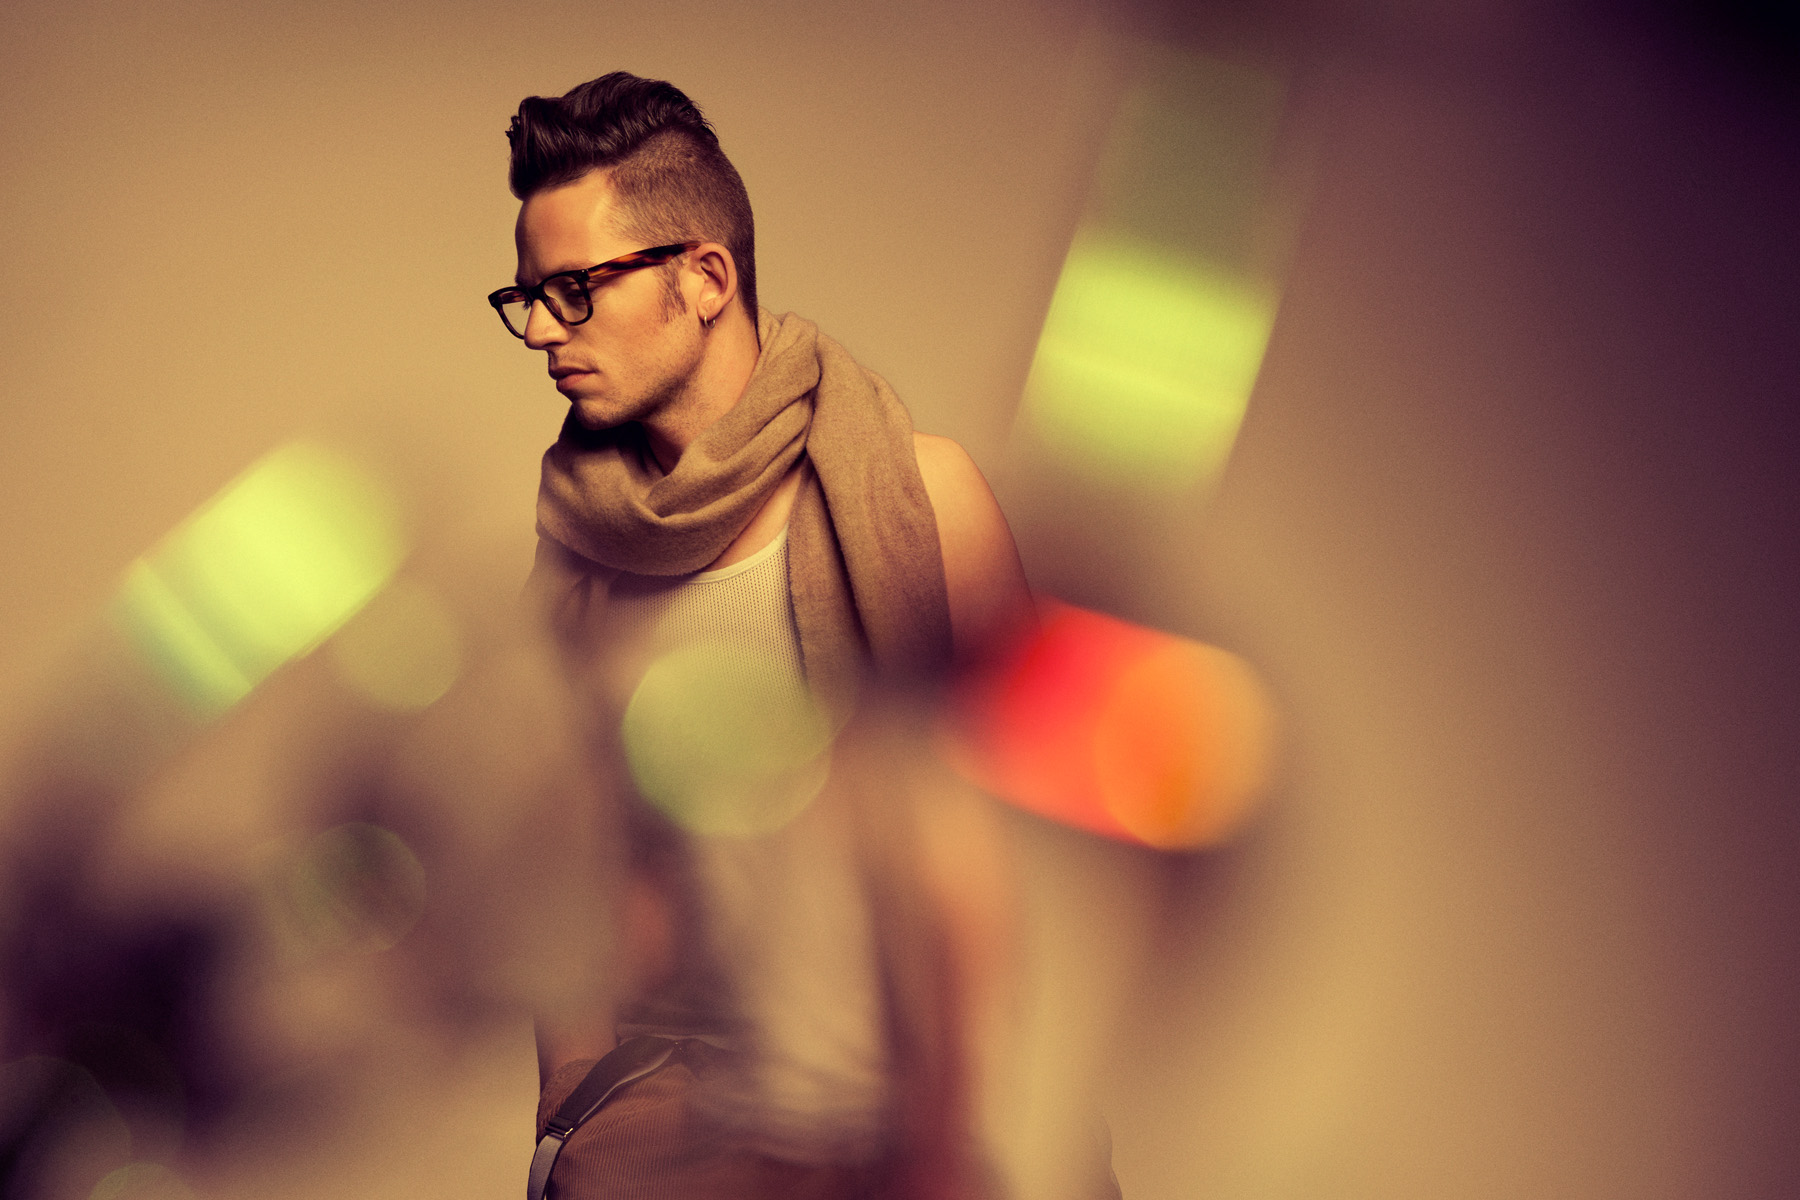 Win! Tickets to see Bernhoft live in London + Manchester!